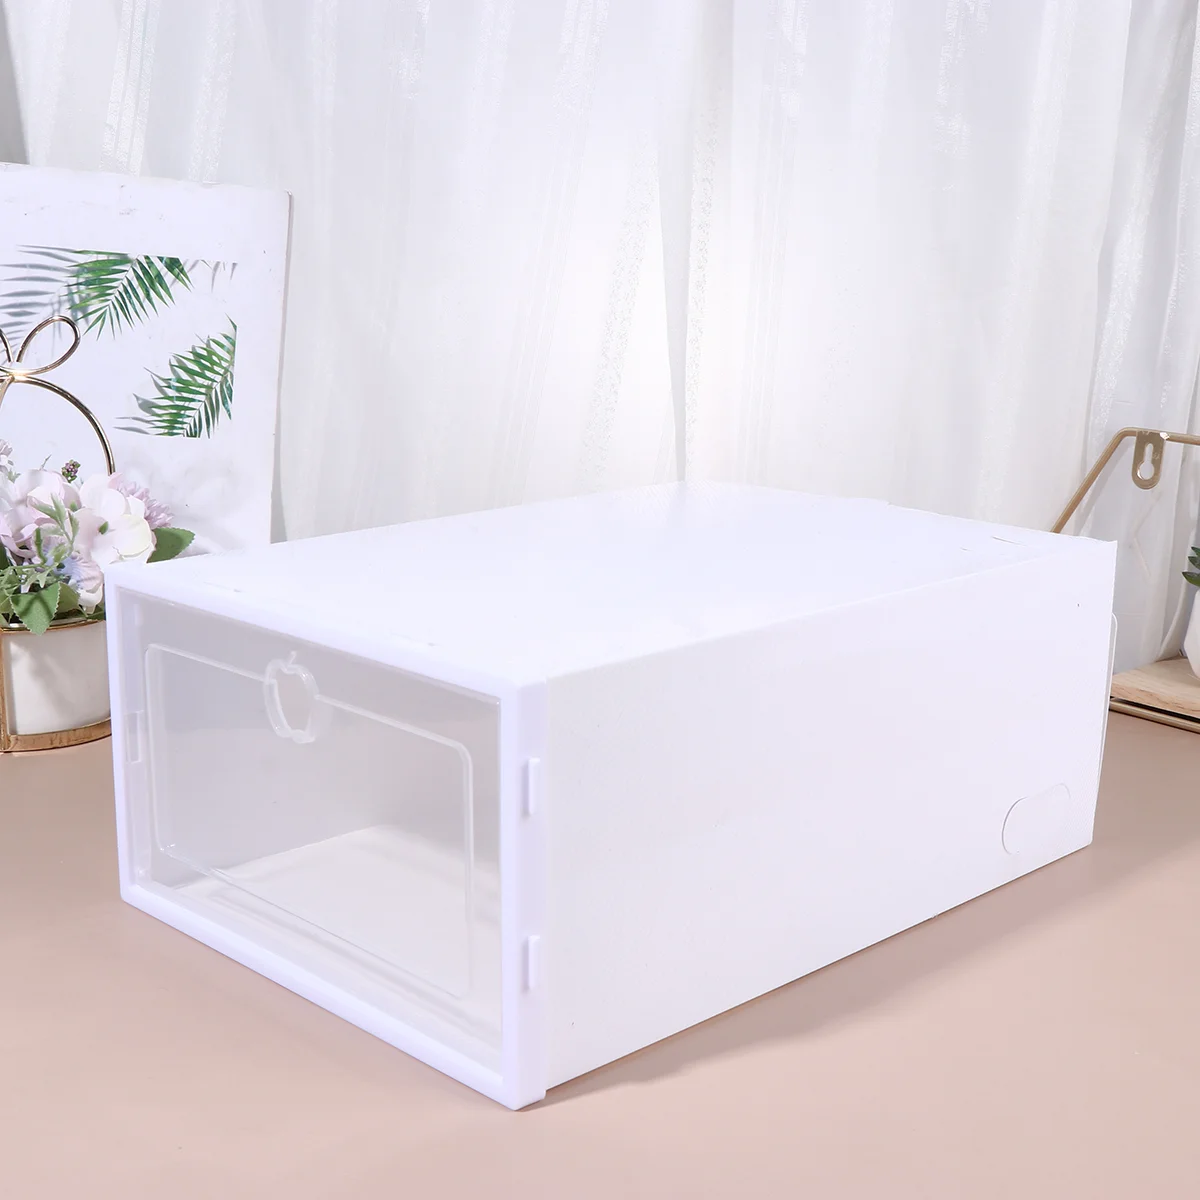 

6pcs Shoes Box Drawer Type Shoe Box Thicken Transparent Shoes Organizer Dust-proof Shoes Display Box (White, Random Frame Color)